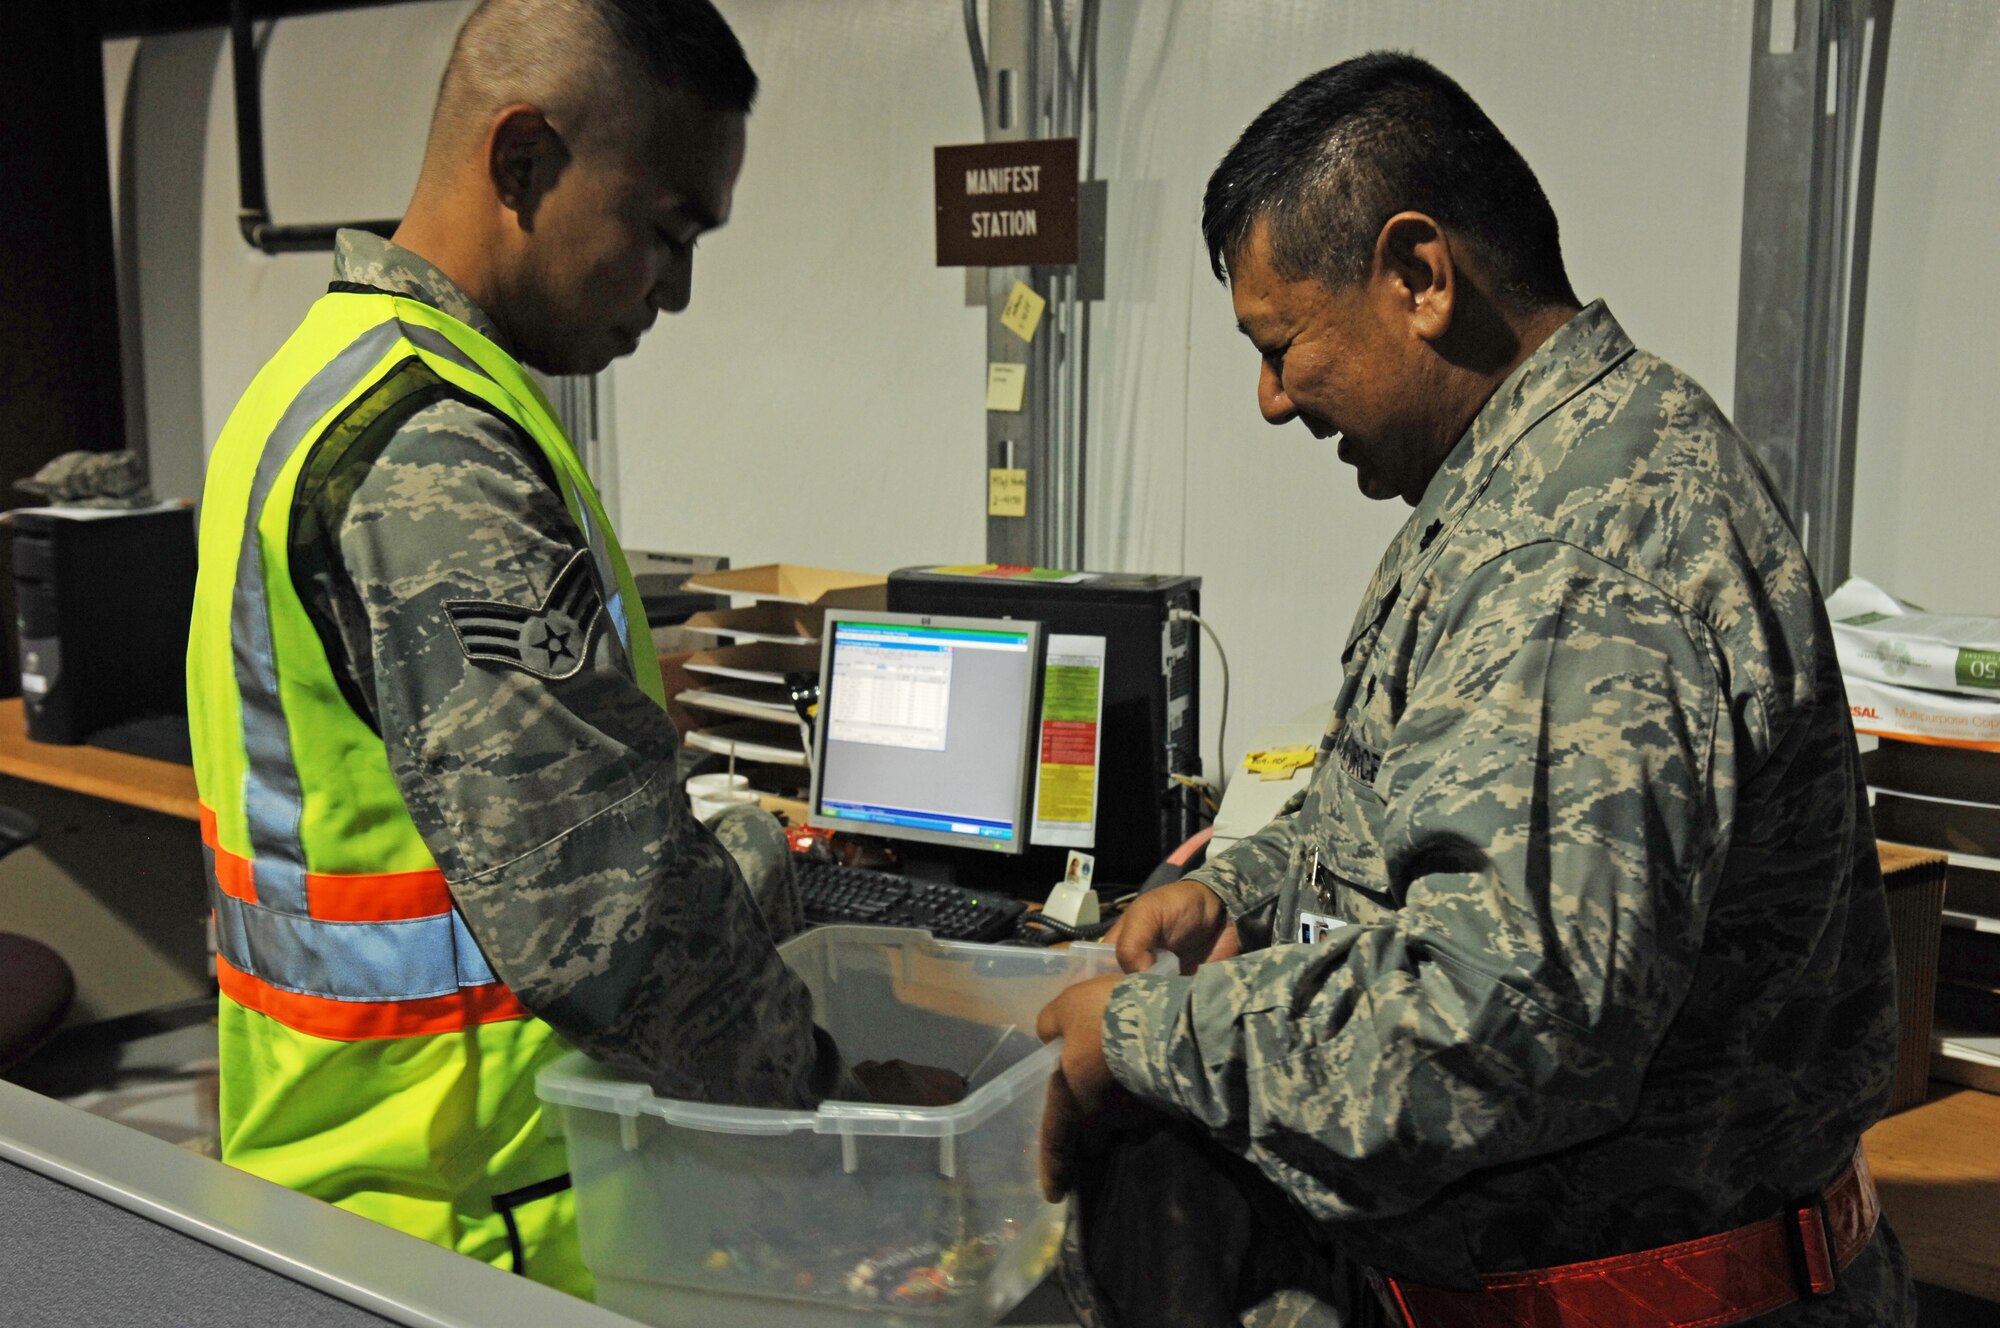 HOLLOMAN AIR FORCE BASE, N.M. -- Senior Airman Darryl Supertran, 49th Logistics Readiness Squadron, receives candy from Lt. Col. William Toguchi, 49th Fighter Wing chaplain, at the Personnel Deployment Facility at Basic Expeditionary Airfield Resources Base during Exercise Cornet Gold Rush here, Oct. 6. Passing out candy is a part of the Chapel's Unit Visitation with Airmen program to ensure morale and welfare stays at an elevated level throughout the exercise. The exercise scenario consisted of processing Airmen for deployment. (U.S. Air Force photo by Staff Sgt. Anthony Nelson Jr.)